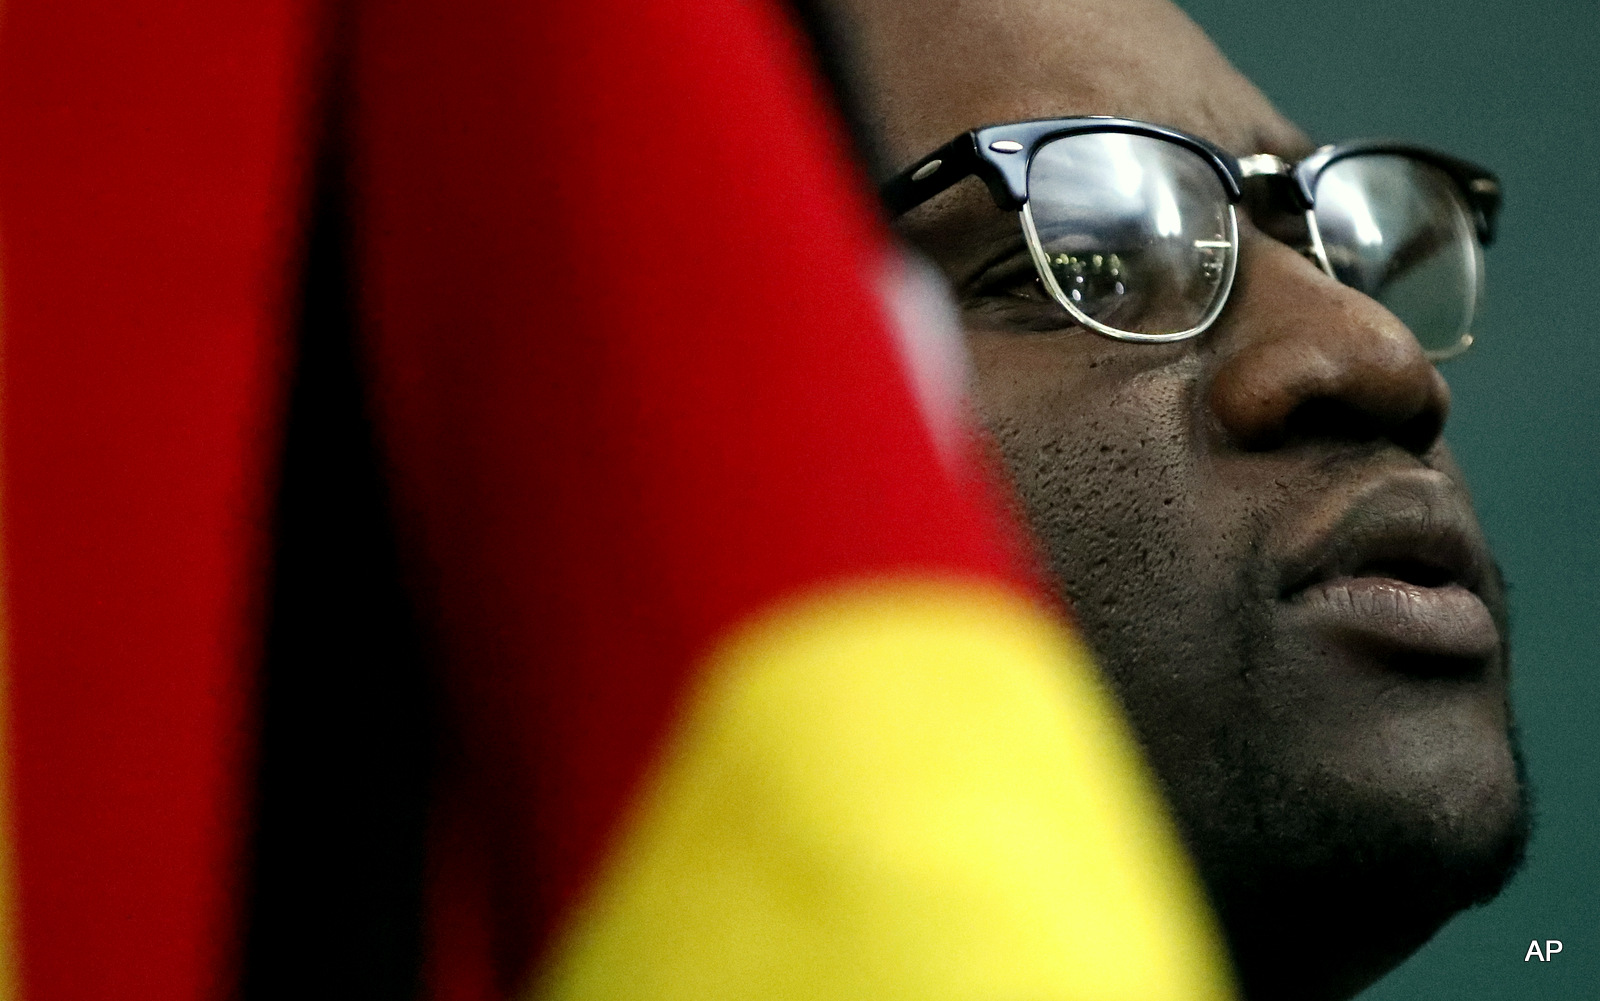 Zimbabwean pastor Evan Mawarire, holds his country's flag whilst singing national anthem before addressing his supporters at the University of the Witwatersrand in Johannesburg, South Africa, Thursday, July 28, 2016. Mawarire, living in exile in South Africa after launching a social media campaign against President Robert Mugabe's government has called for a massive uprising against the country's government. 